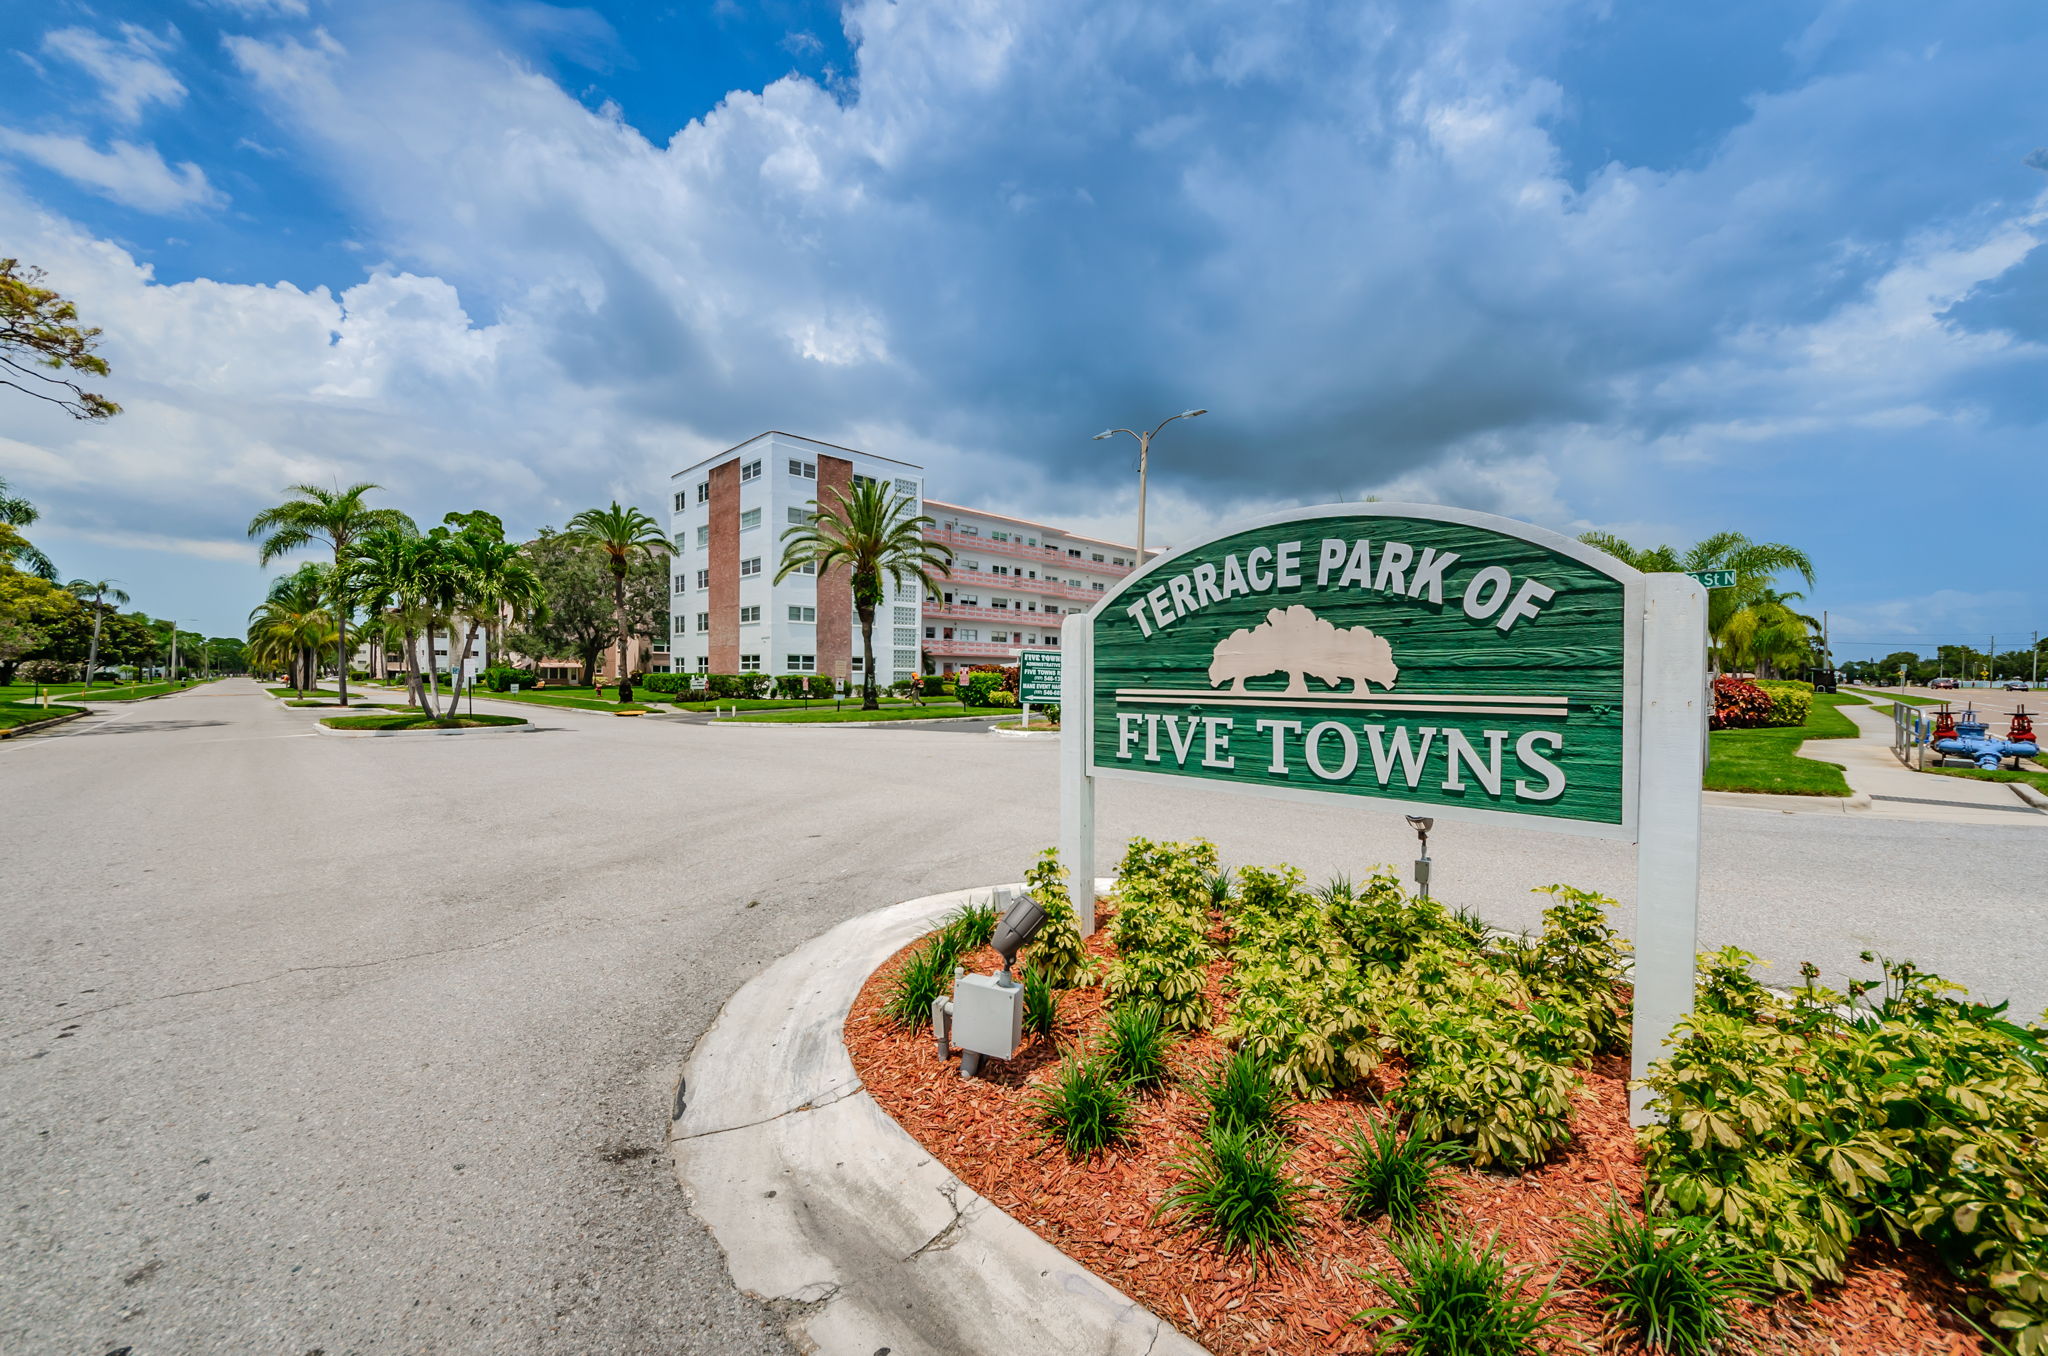 Terrace Park of Five Towns Sign